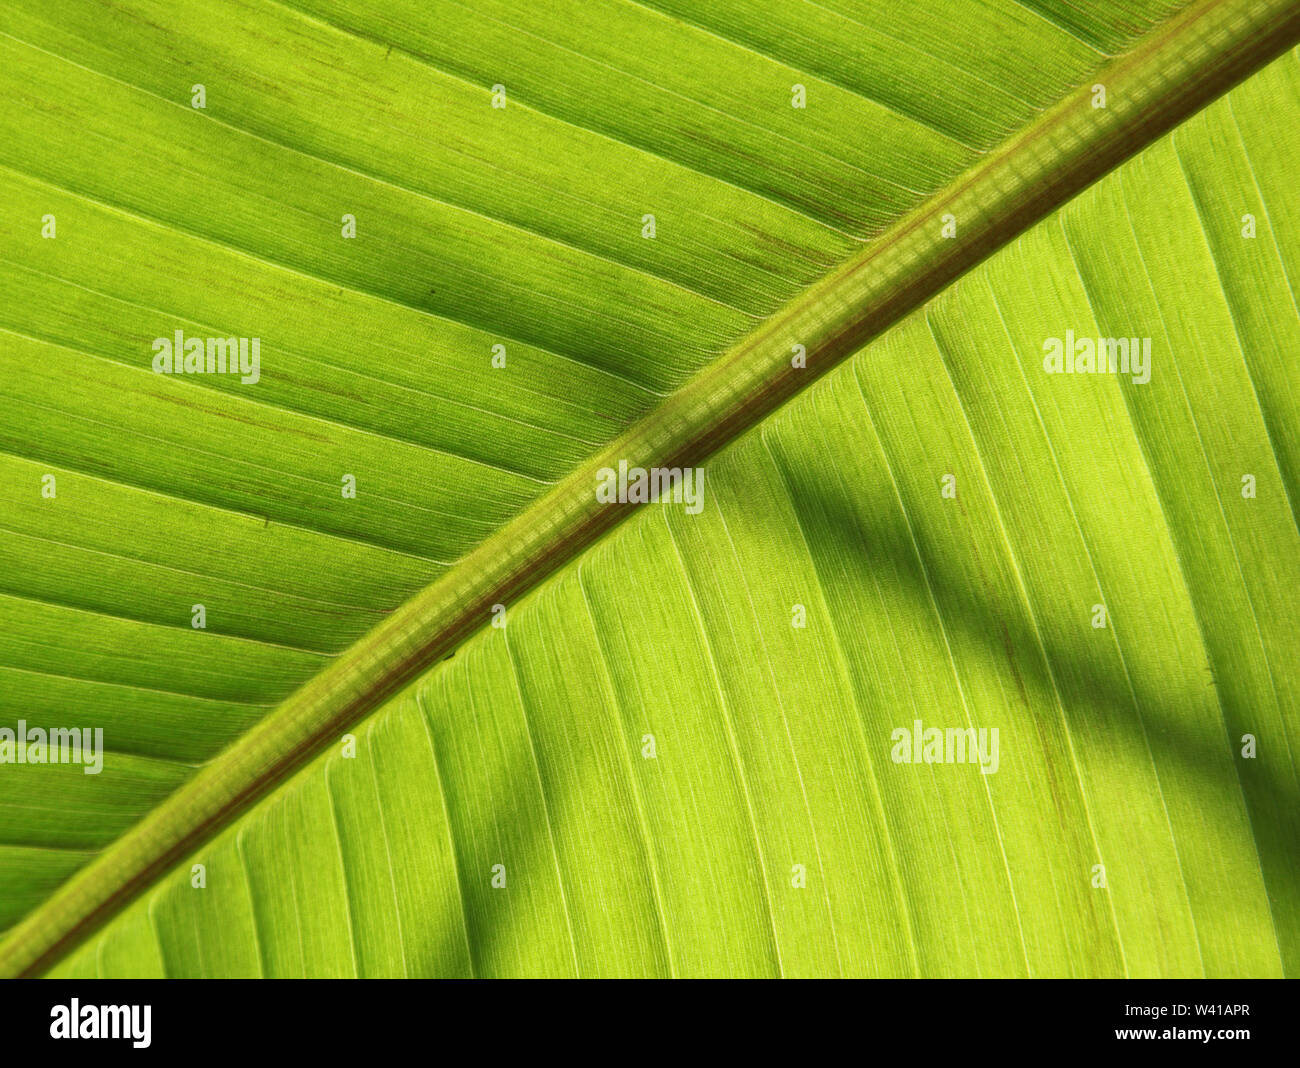 Close-up detail of the leaf of a banana plant, Musa Basjoo, in a London. garden. Light shines through showing leaf structure. Stock Photo